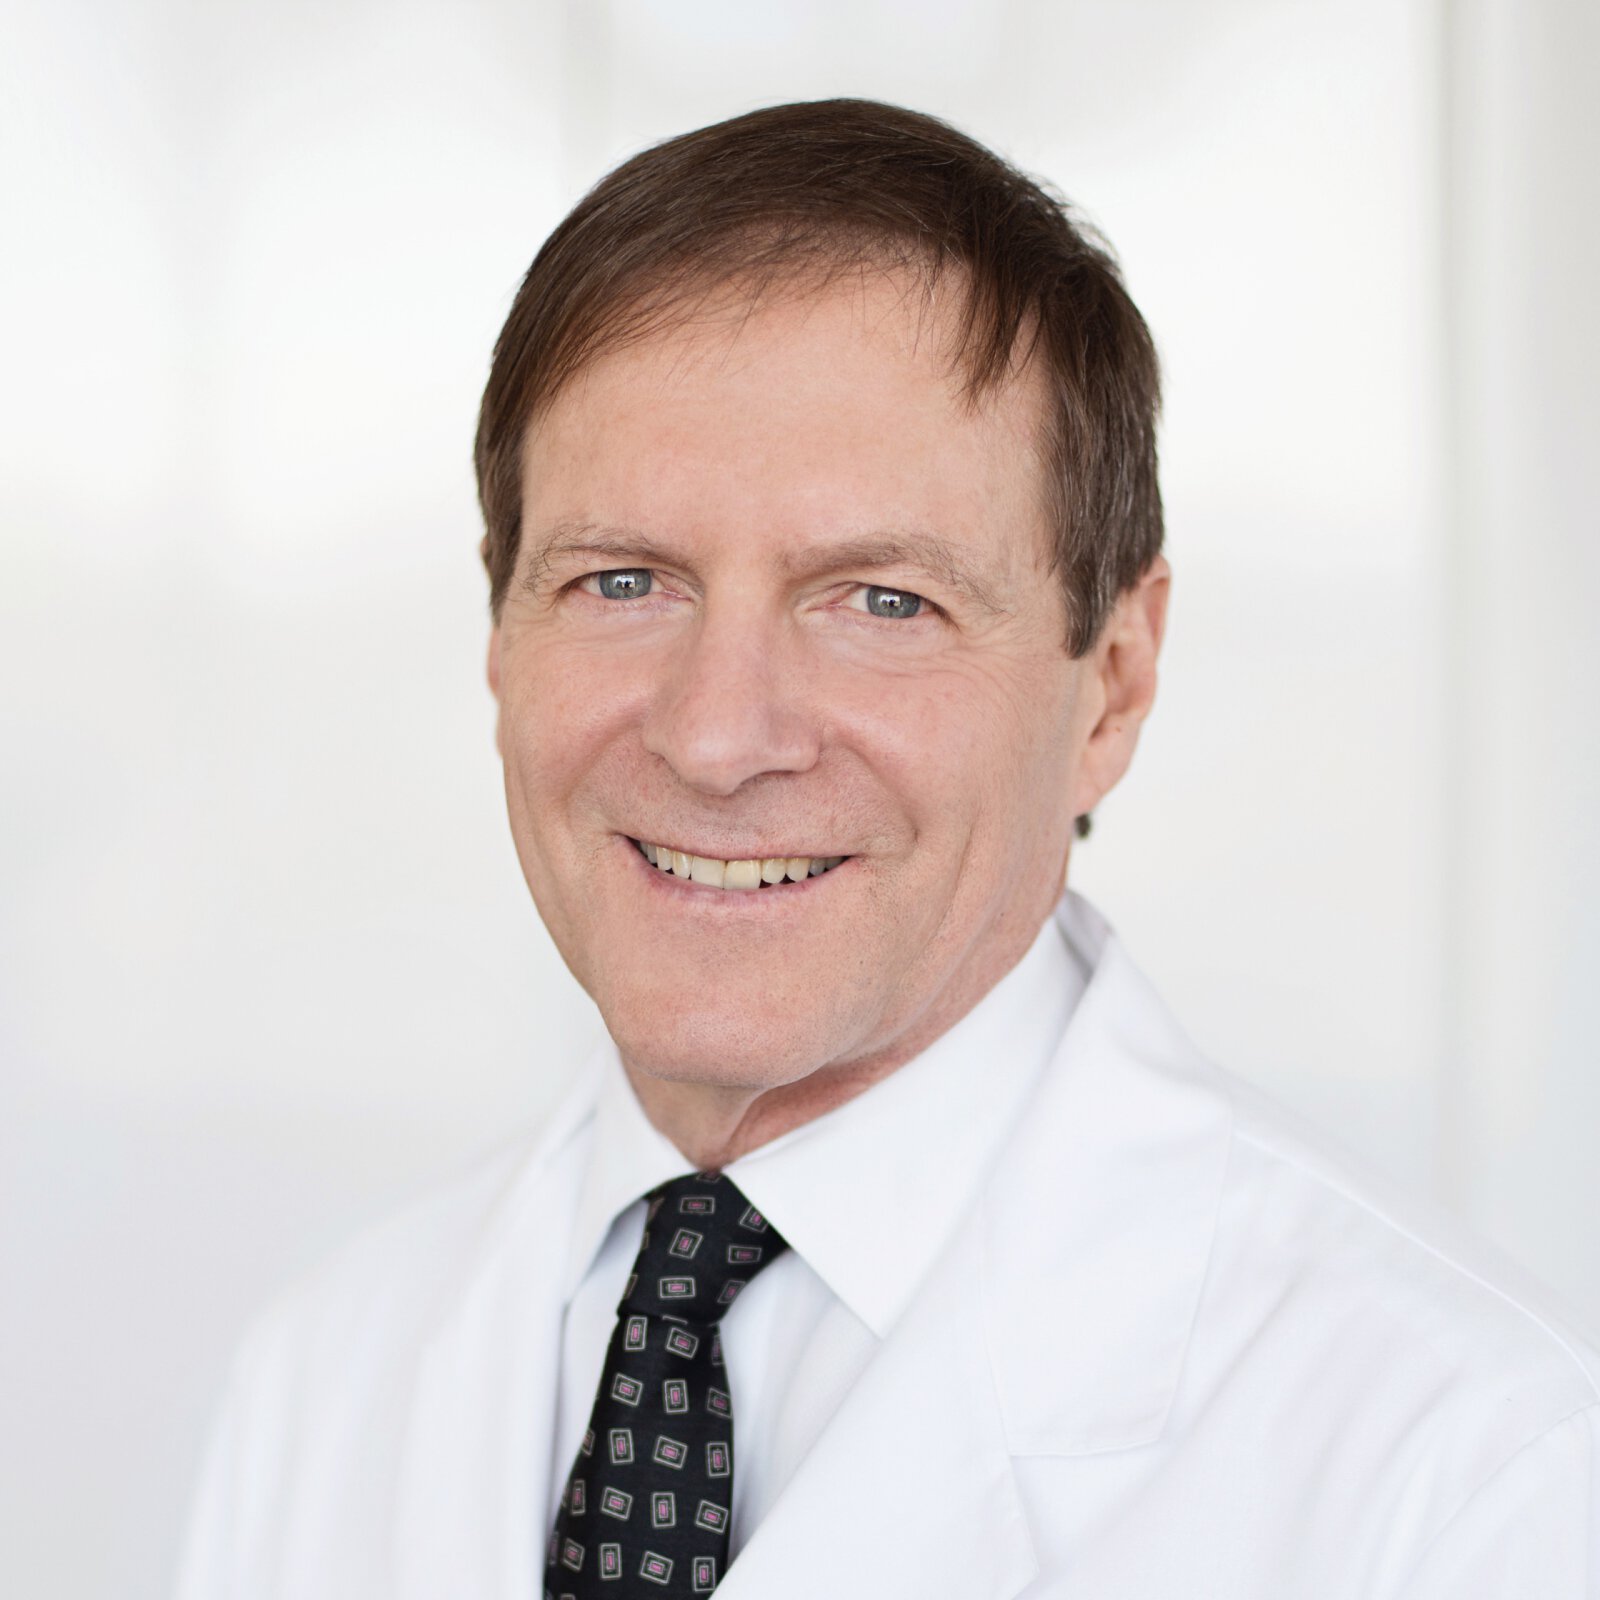 Dr. Mark Jewell